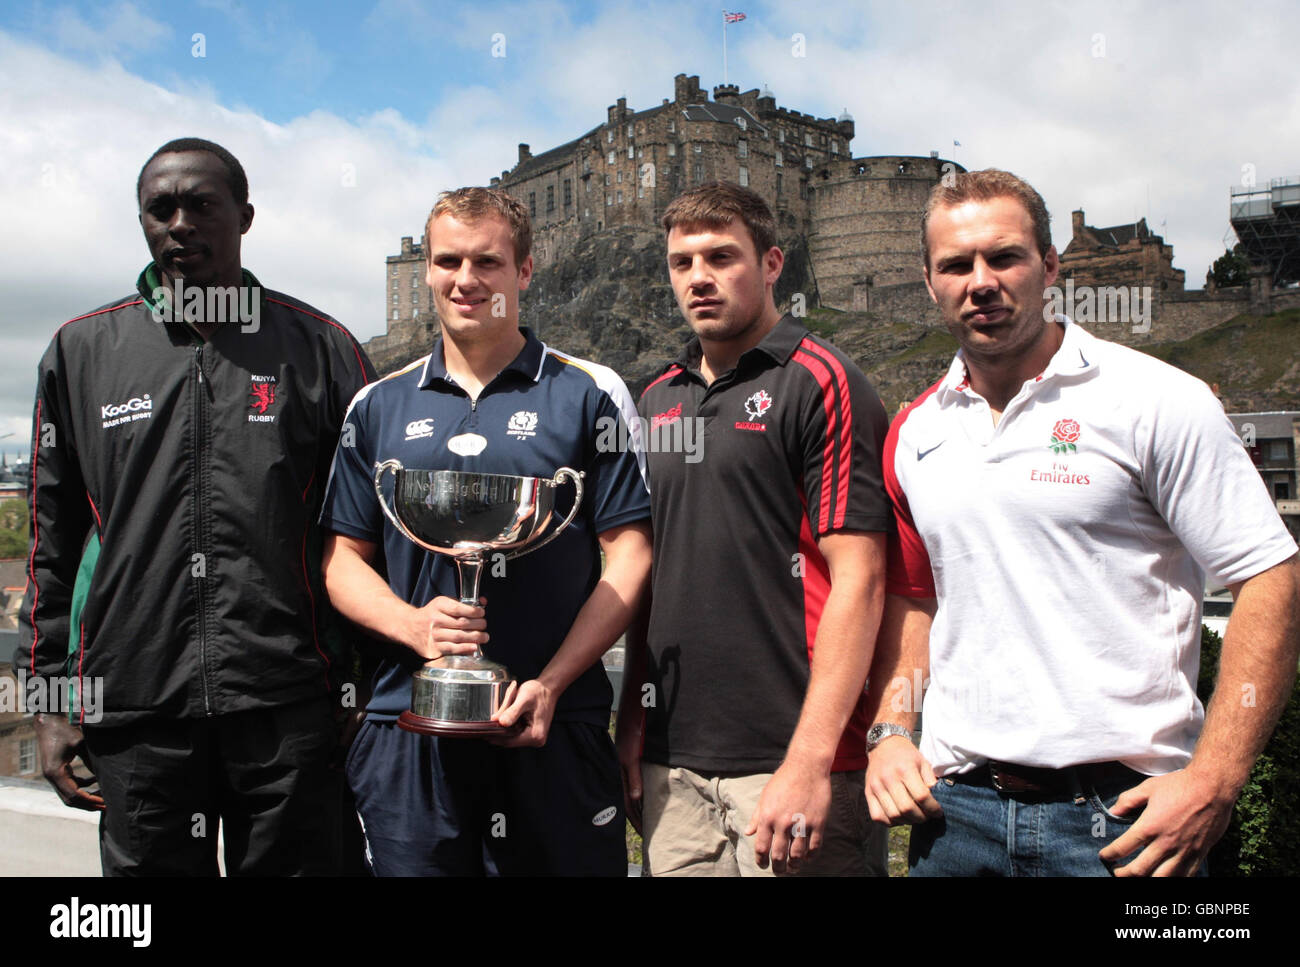 Team Captains; Kenya's Humphrey Kayange, Scotland's Scott Forrest, Canada's Neil Meecham and England's Ollie Phillips (left to right) pose with the 7s Cup Trophy during an Emirates Airline Edinburgh 7s Festival photocall in Edinburgh, Scotland. Stock Photo